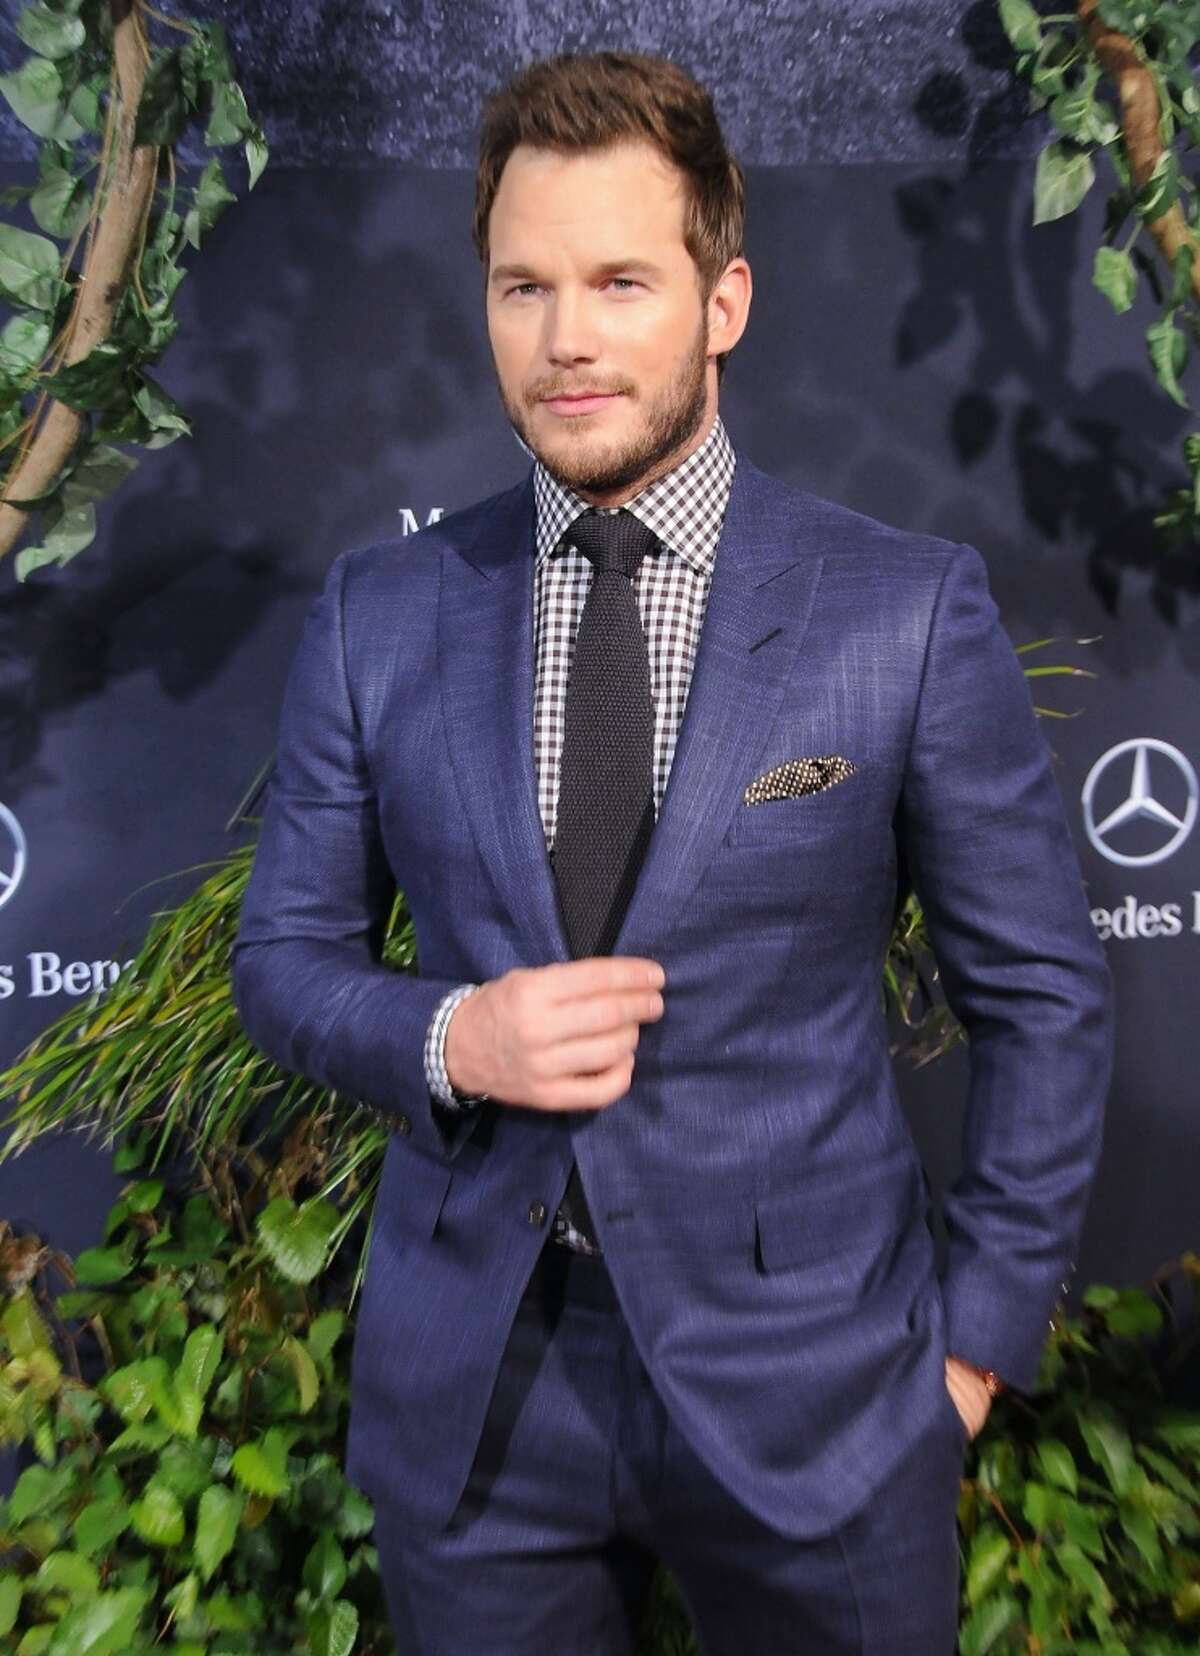 Chris Pratt is adorable and we guarantee he's a fun dad. The "Jurassic World" star is a dad to son Jack, who he welcomed into the world with wife Anna Faris a little bit earlier than they expected in 2012. He has really touching things to say about his son's early arrival.